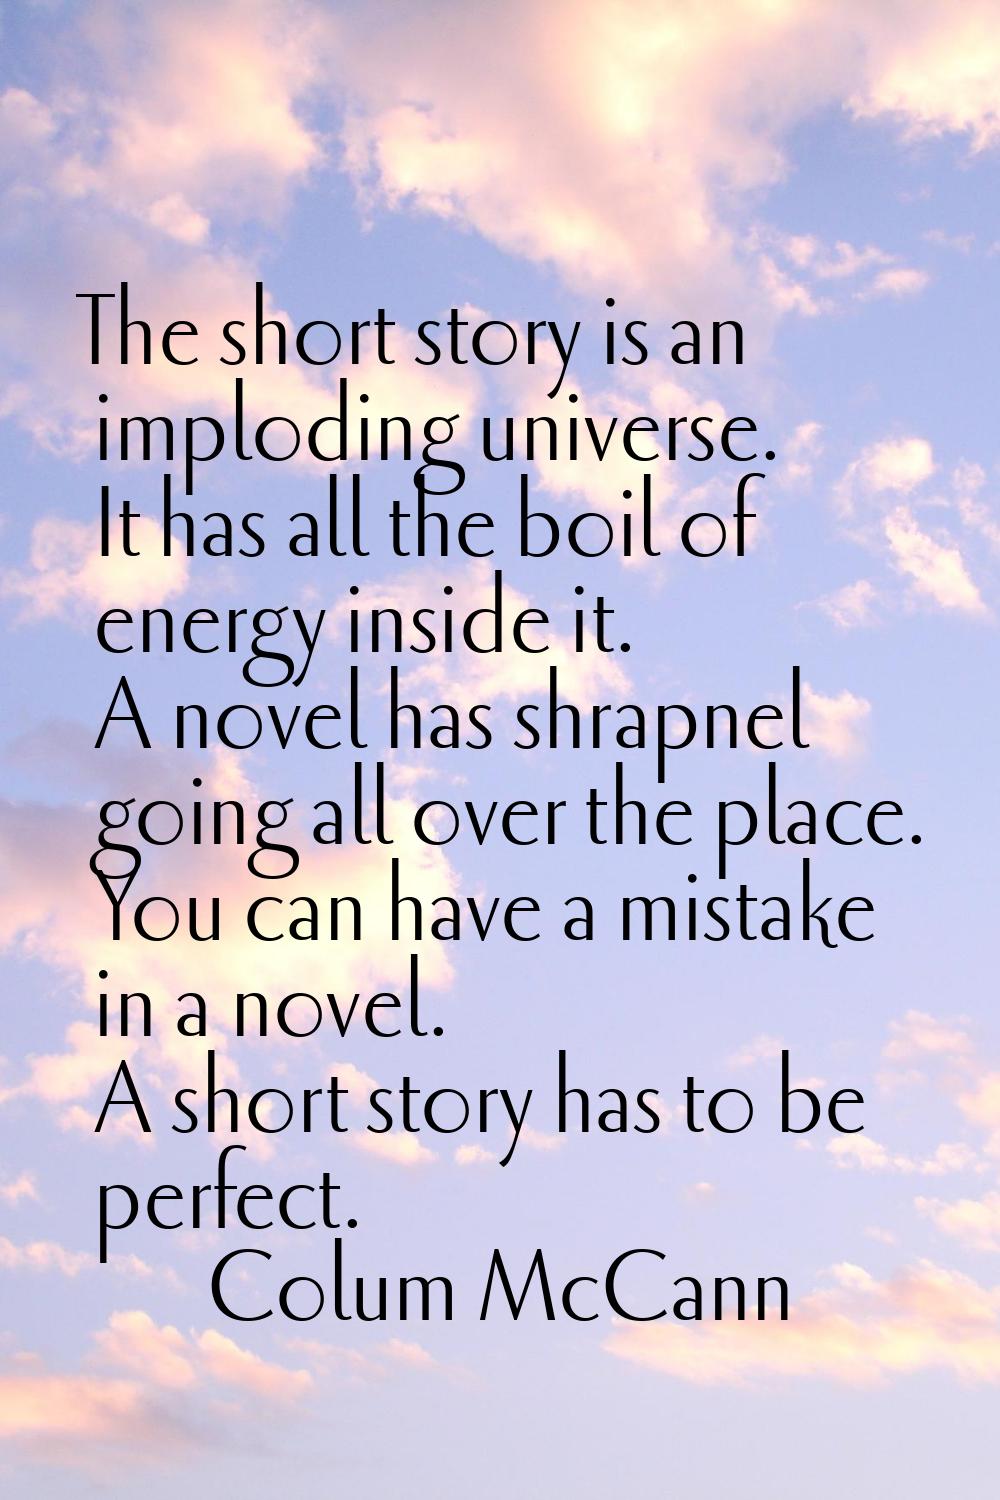 The short story is an imploding universe. It has all the boil of energy inside it. A novel has shra